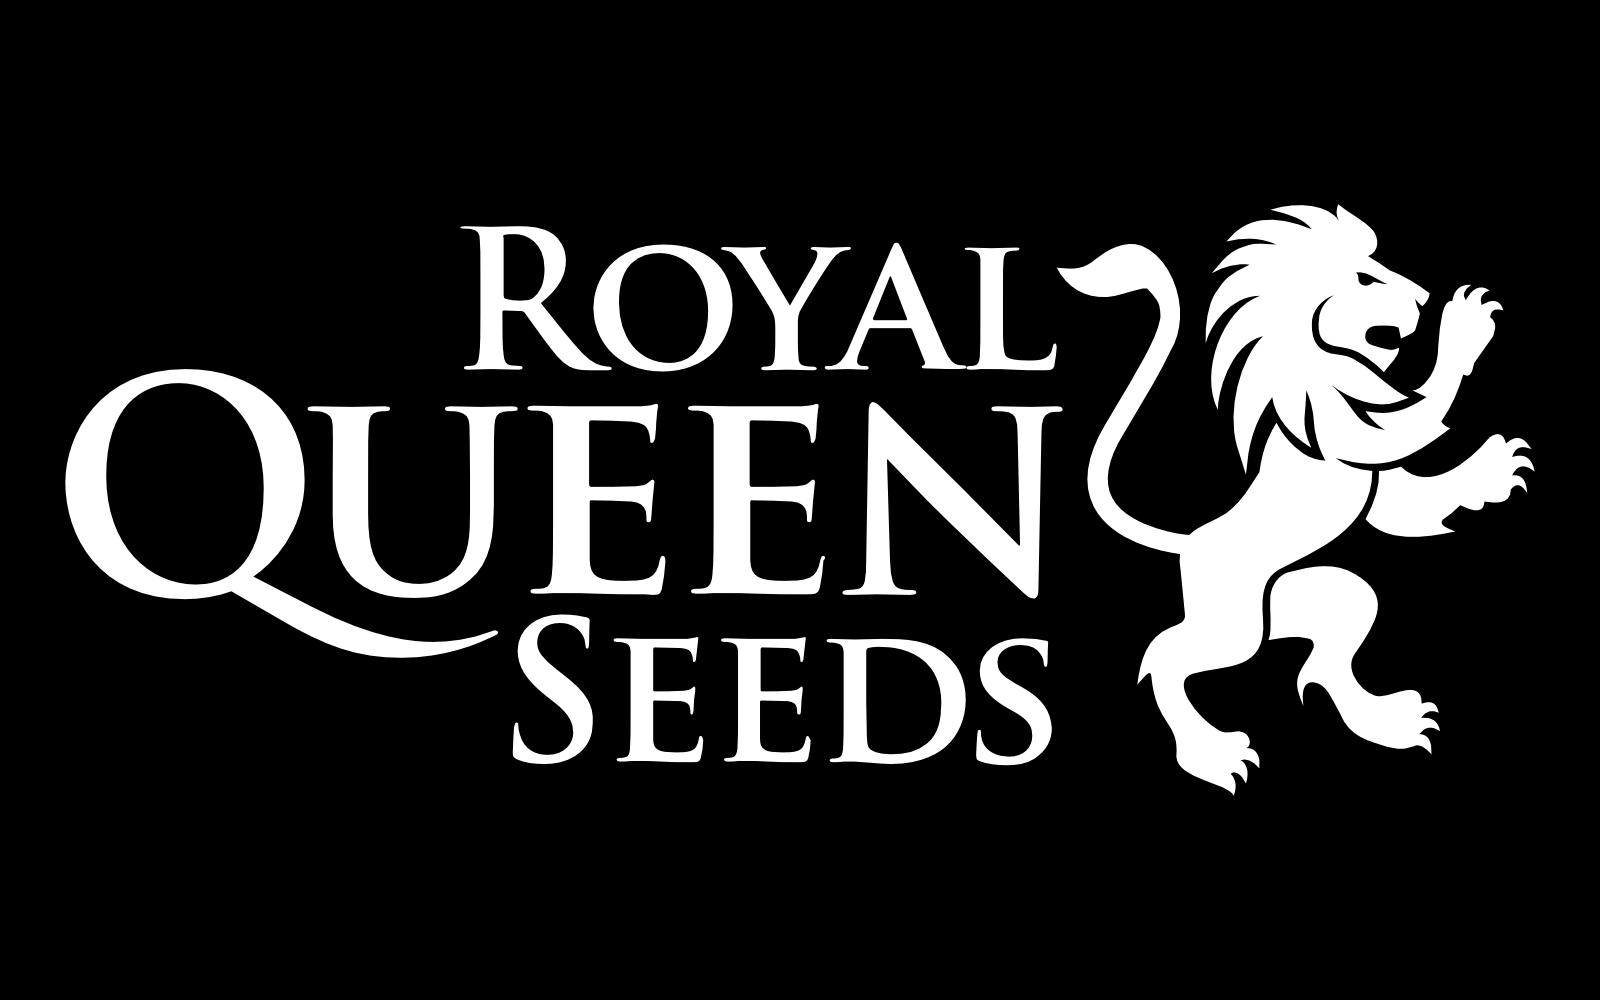 https://cd-labs.com/wp/wp-content/uploads/2020/03/Royal-Queen-Seeds.gif